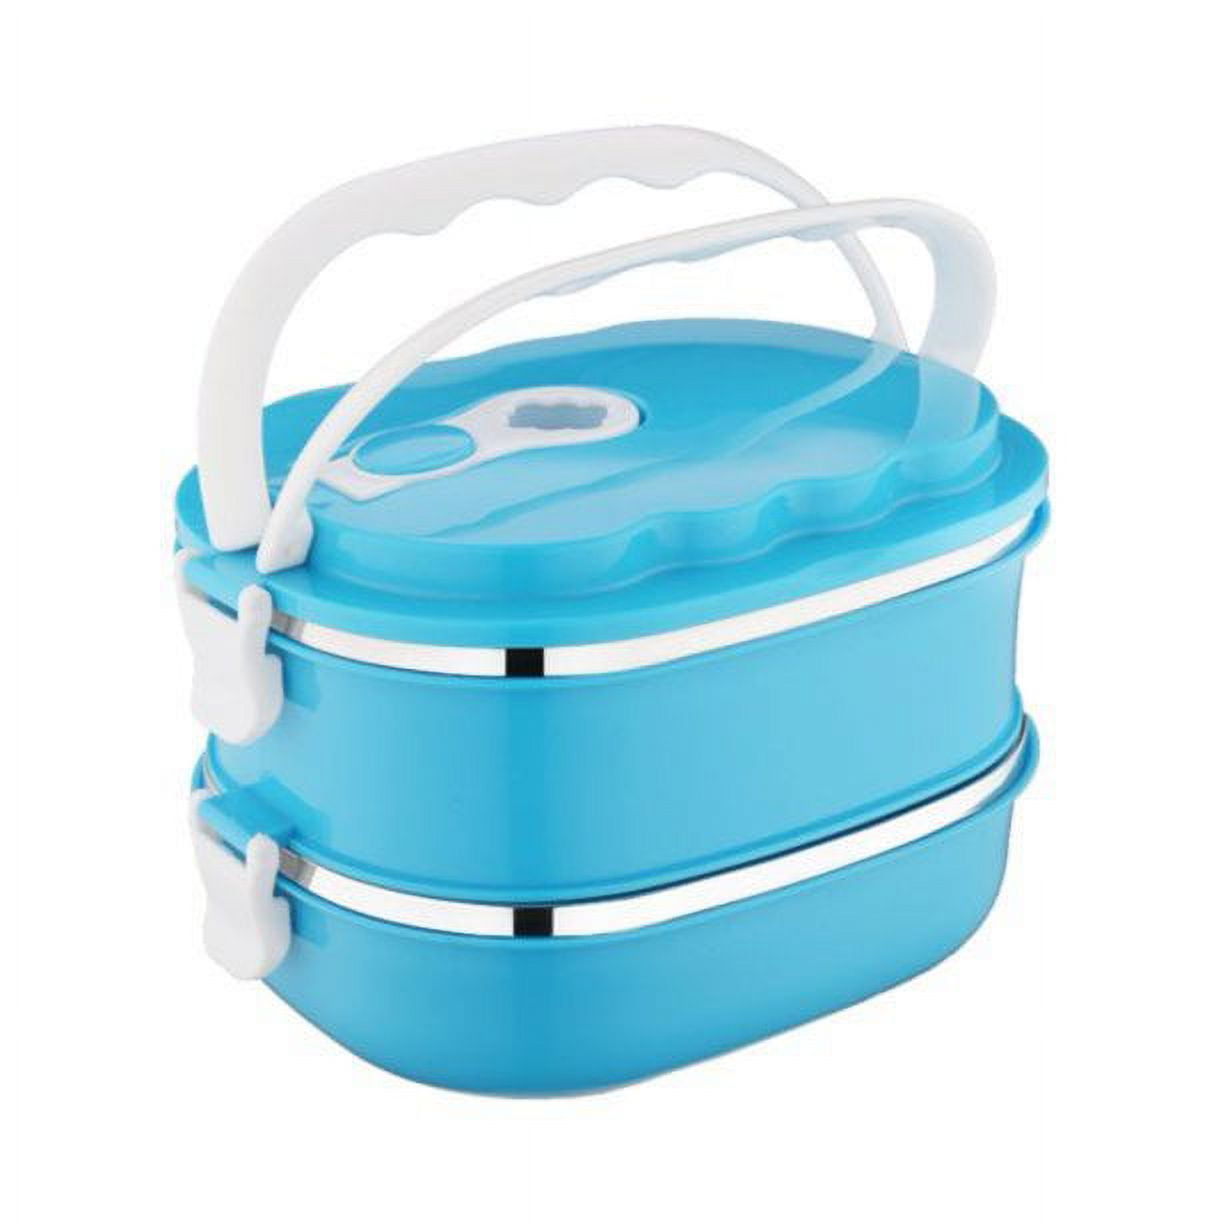 EASTIN Thermal Lunch Box Bento Lunch Box with Stainless Steel Thermal  Insulation, 1 Layer of Food Containers Leak Proof For Kids, Adult KEEP FOOD  WARM suitable for School, Office or Picnic 